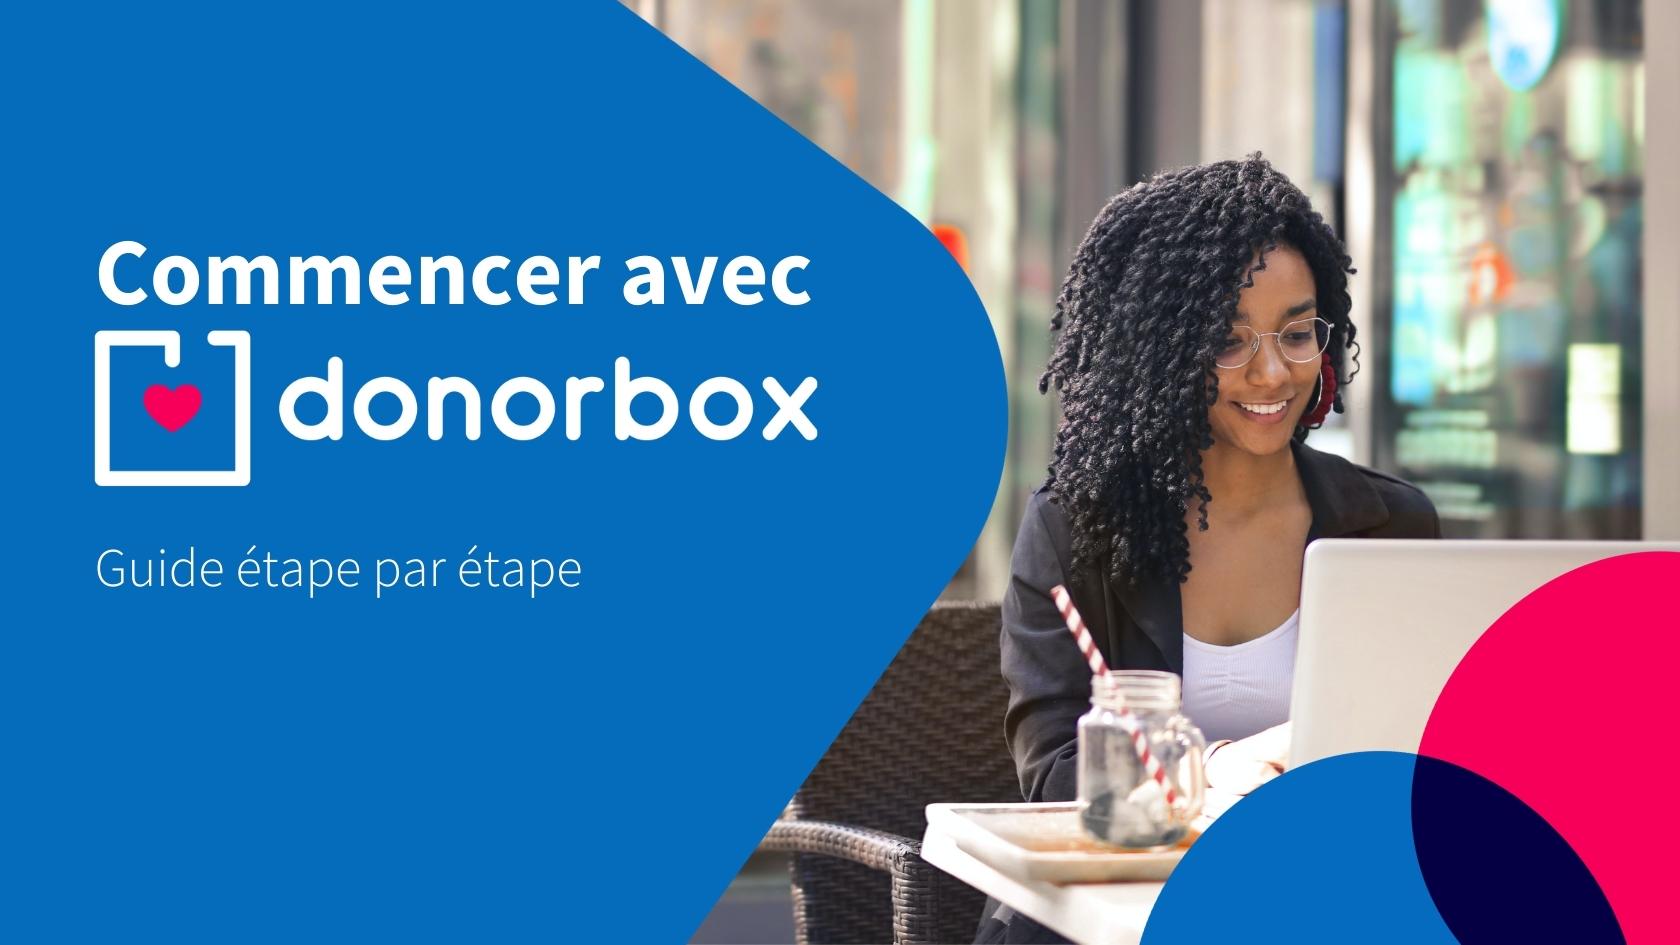 Commencer avec Donorbox